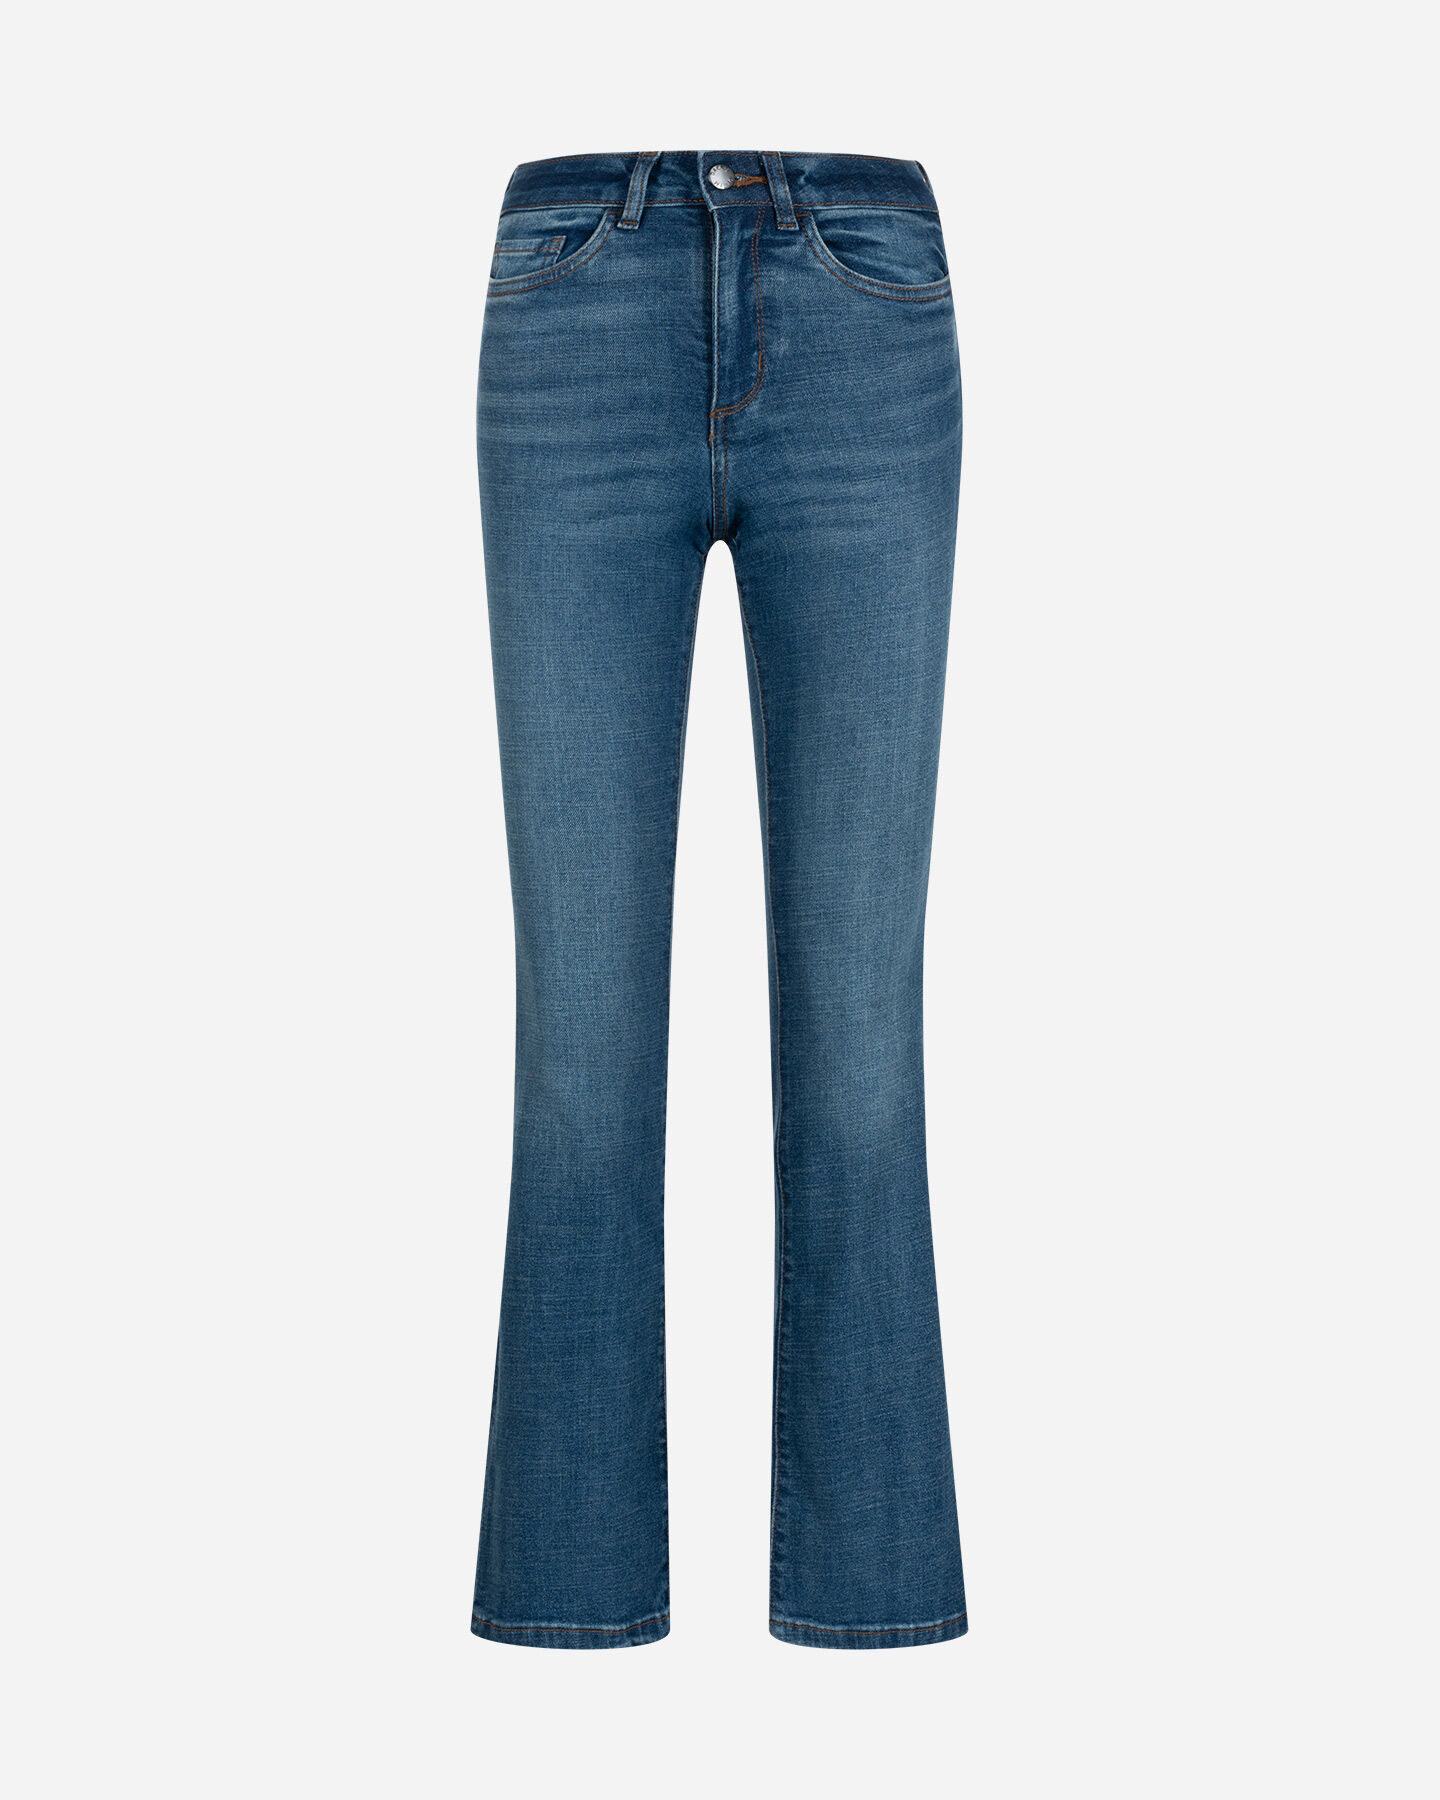  Jeans DACK'S ESSENTIAL W S4130220|MD|42 scatto 4